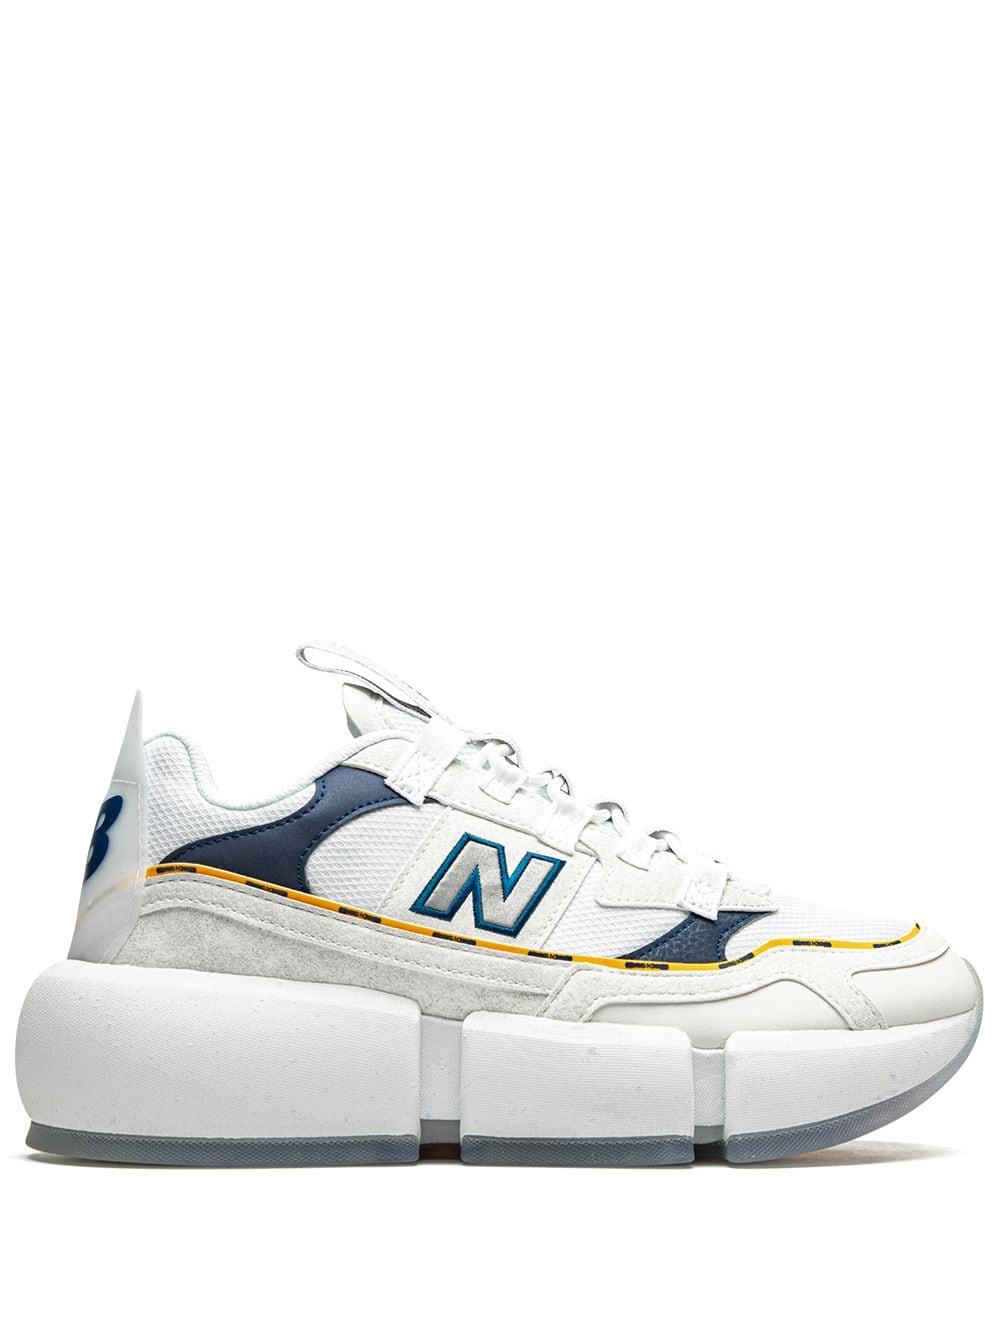 New Balance Vision Racer "jaden Smith" Low-top Sneakers in White for Men -  Save 36% - Lyst